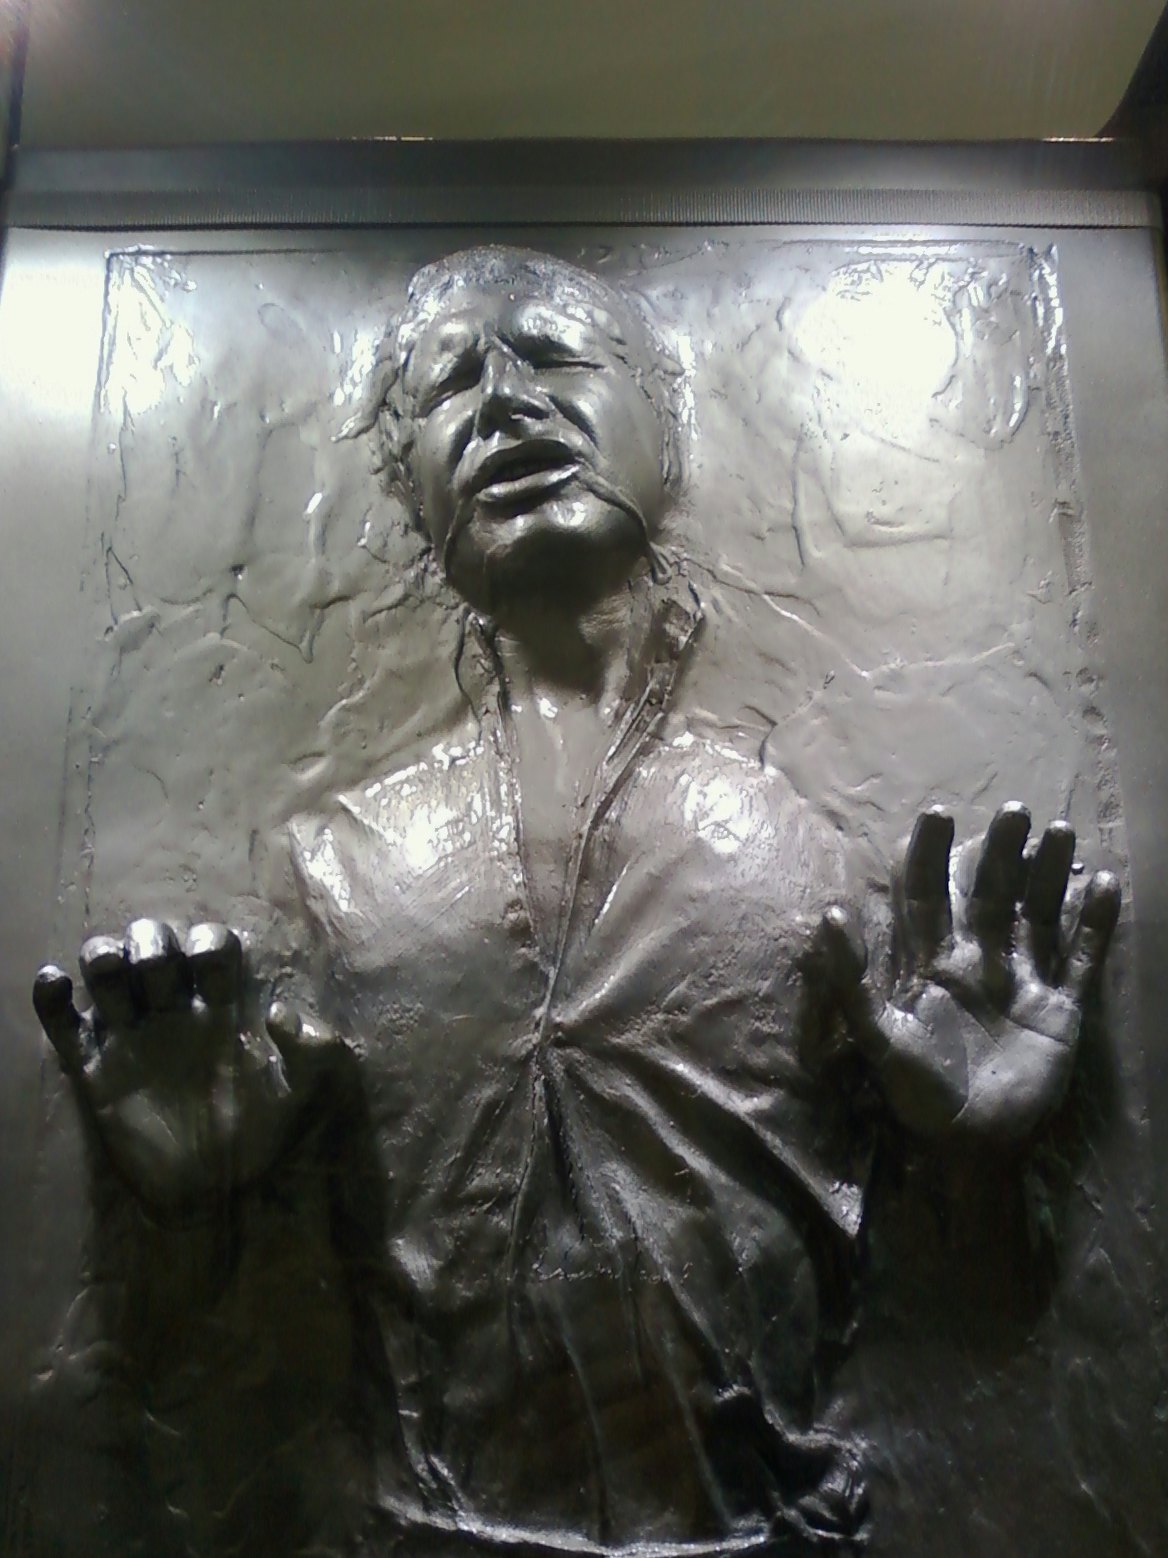 carbonite-freezing-might-not-kill-you-but-it-probably-would.jpeg